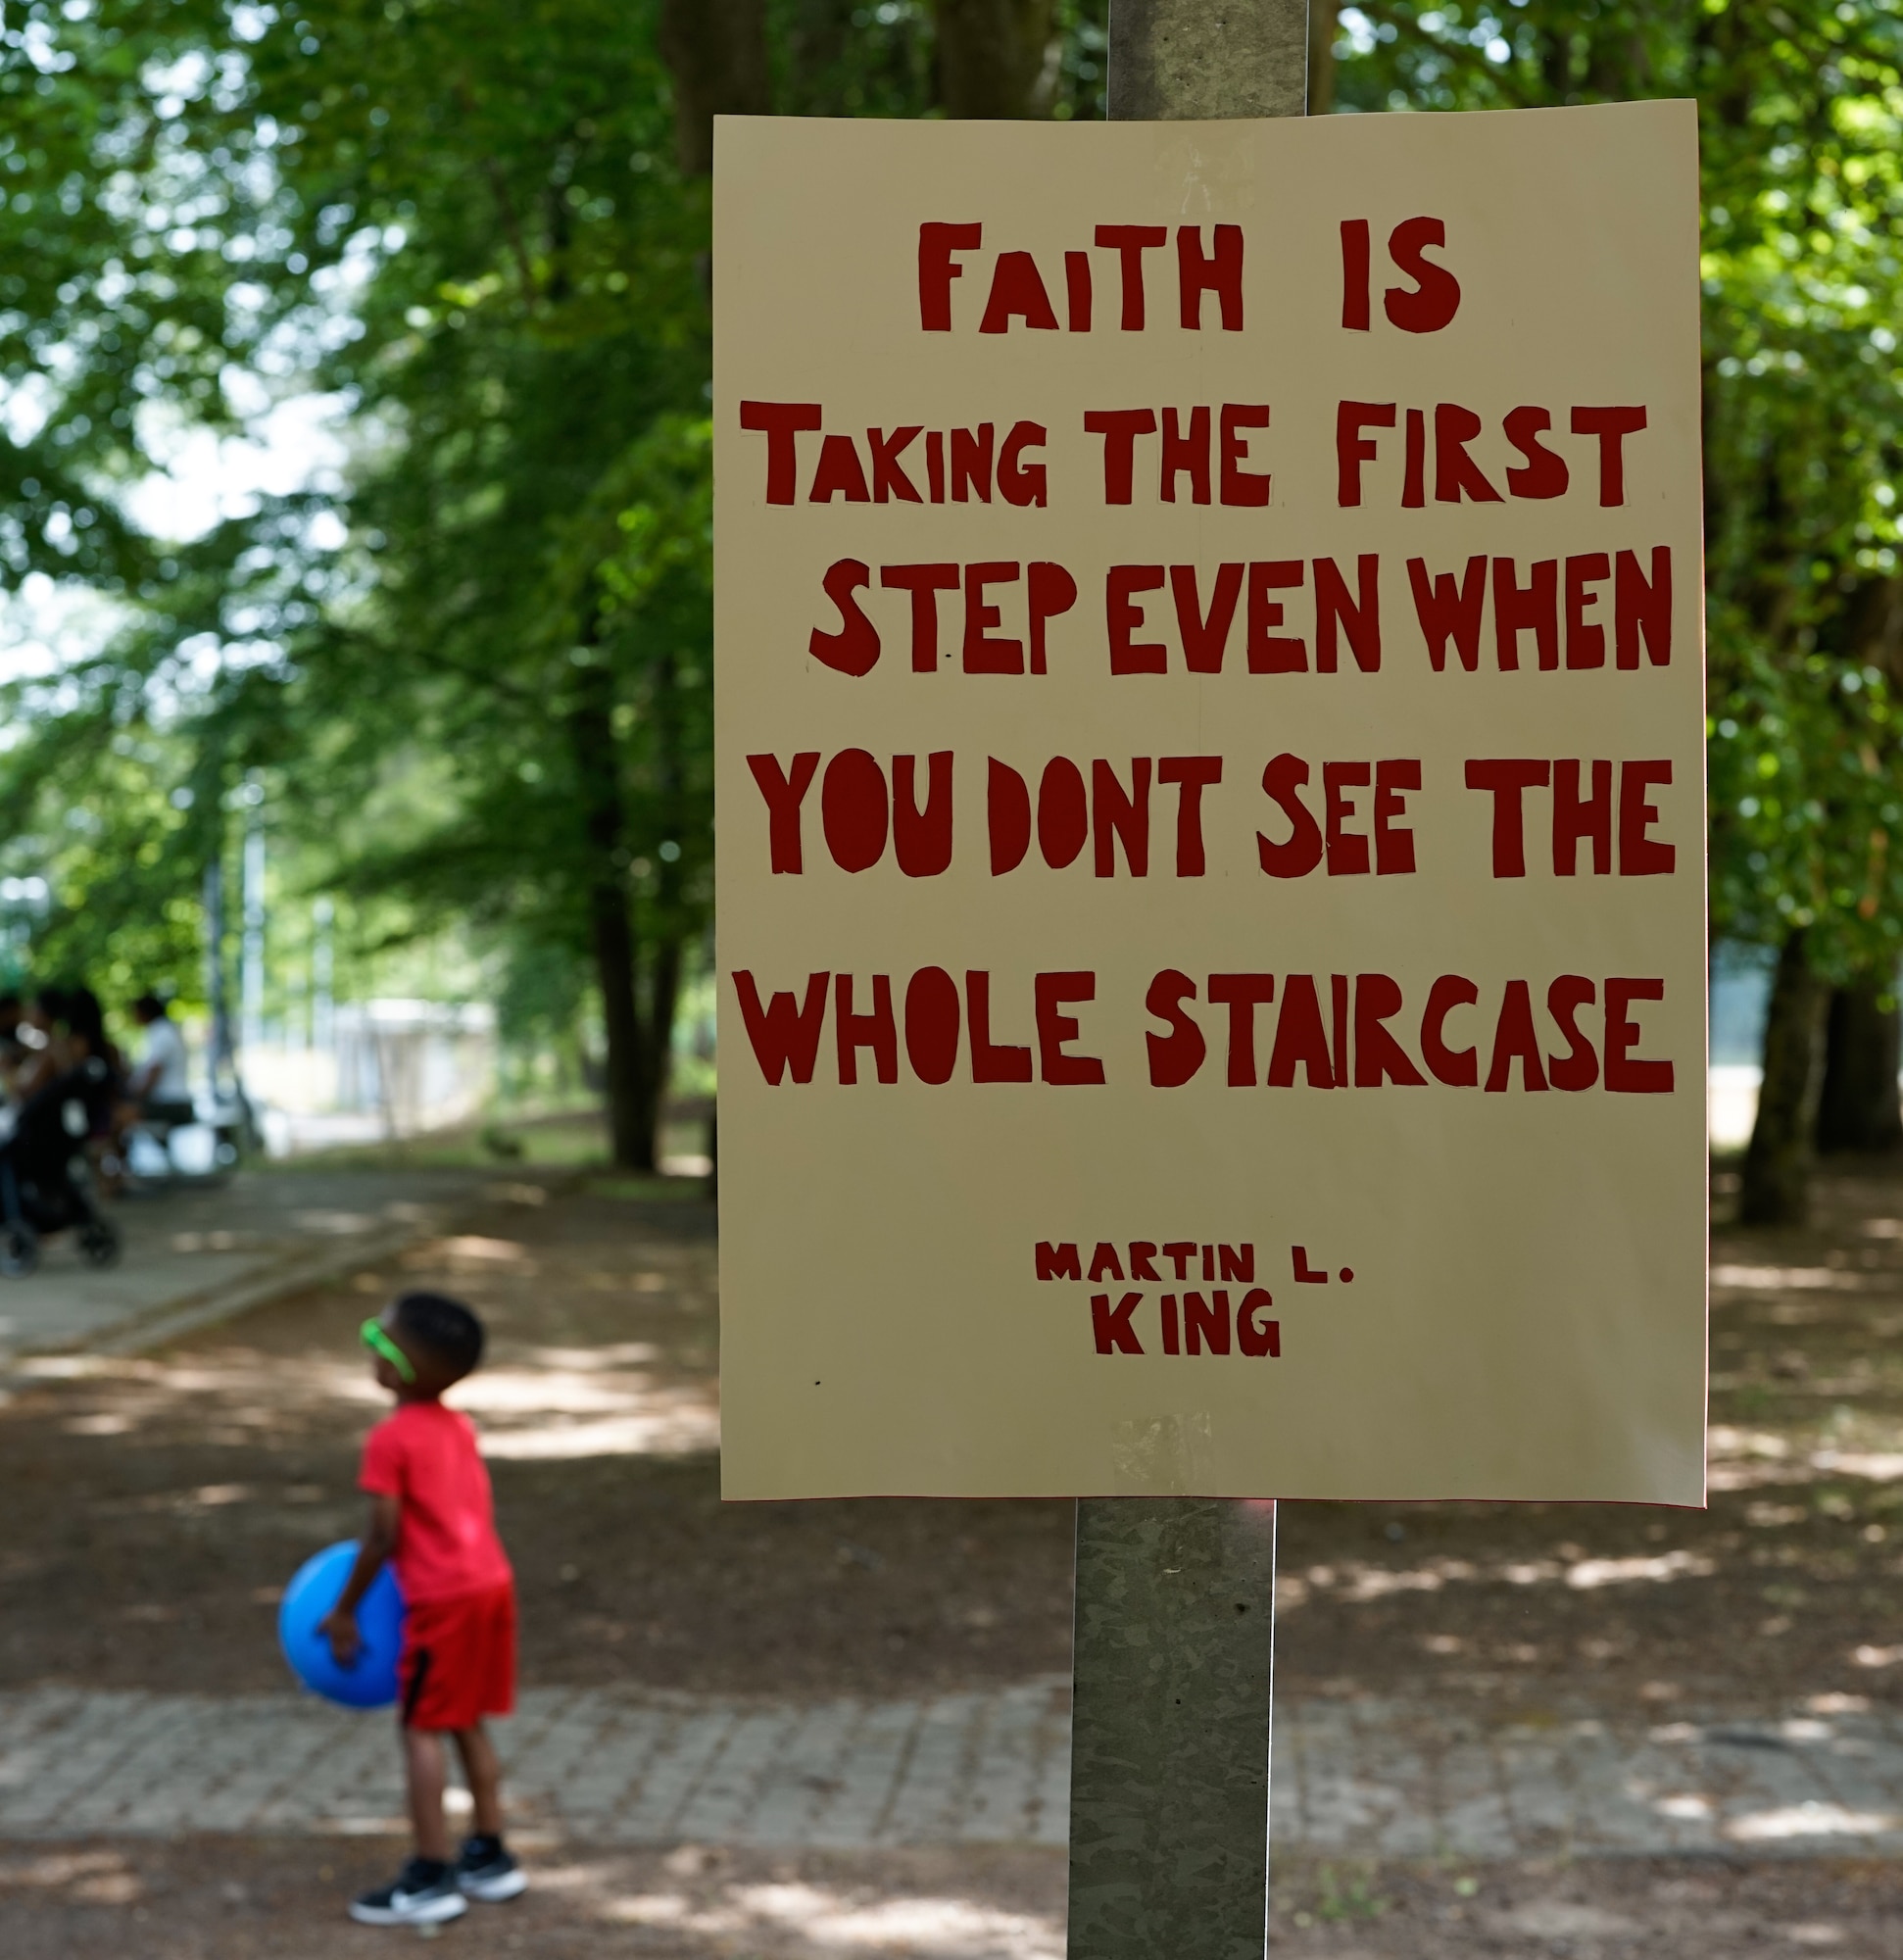 A poster with an inspirational quote hangs in the park at Pulaski Barracks, Germany, June 18, 2022. The poster was one of many inspirational quotes placed throughout the park in honor of the Juneteenth Celebration. (U.S. Air Force photo by Airman 1st Class Lauren Jacoby)